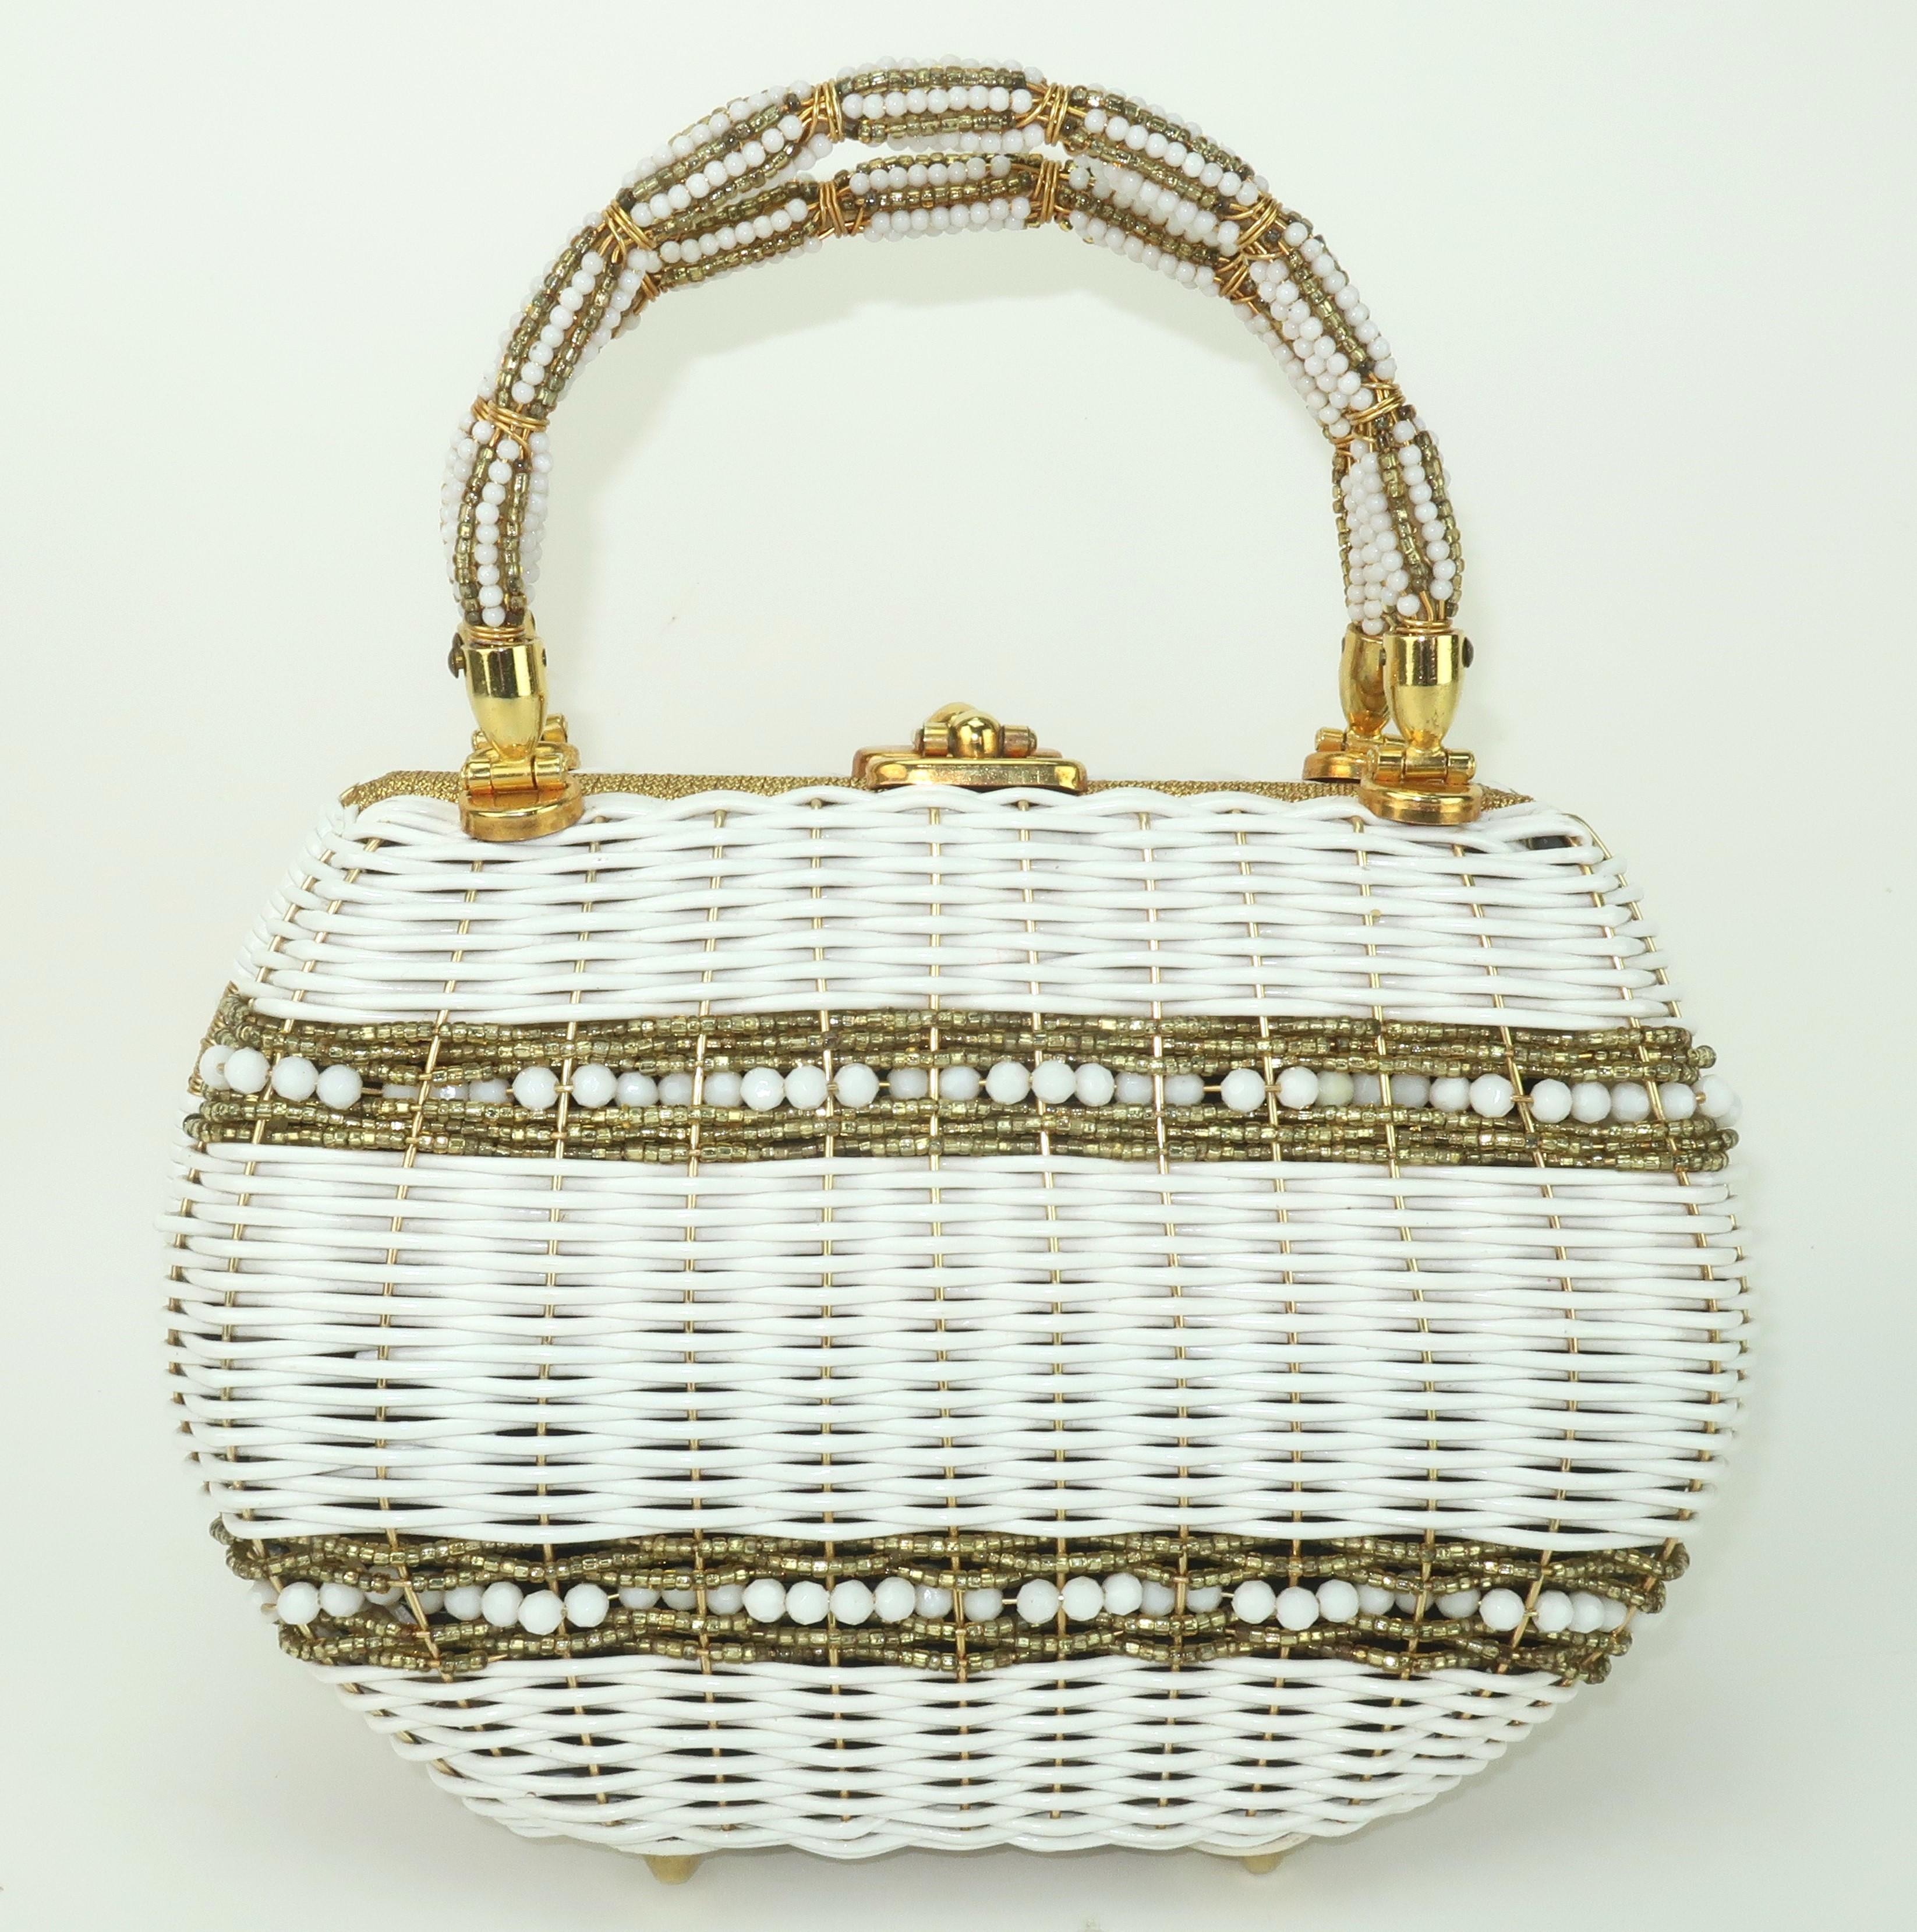 Marcus Brothers Beaded White & Gold Straw Handbag, 1950's For Sale 2